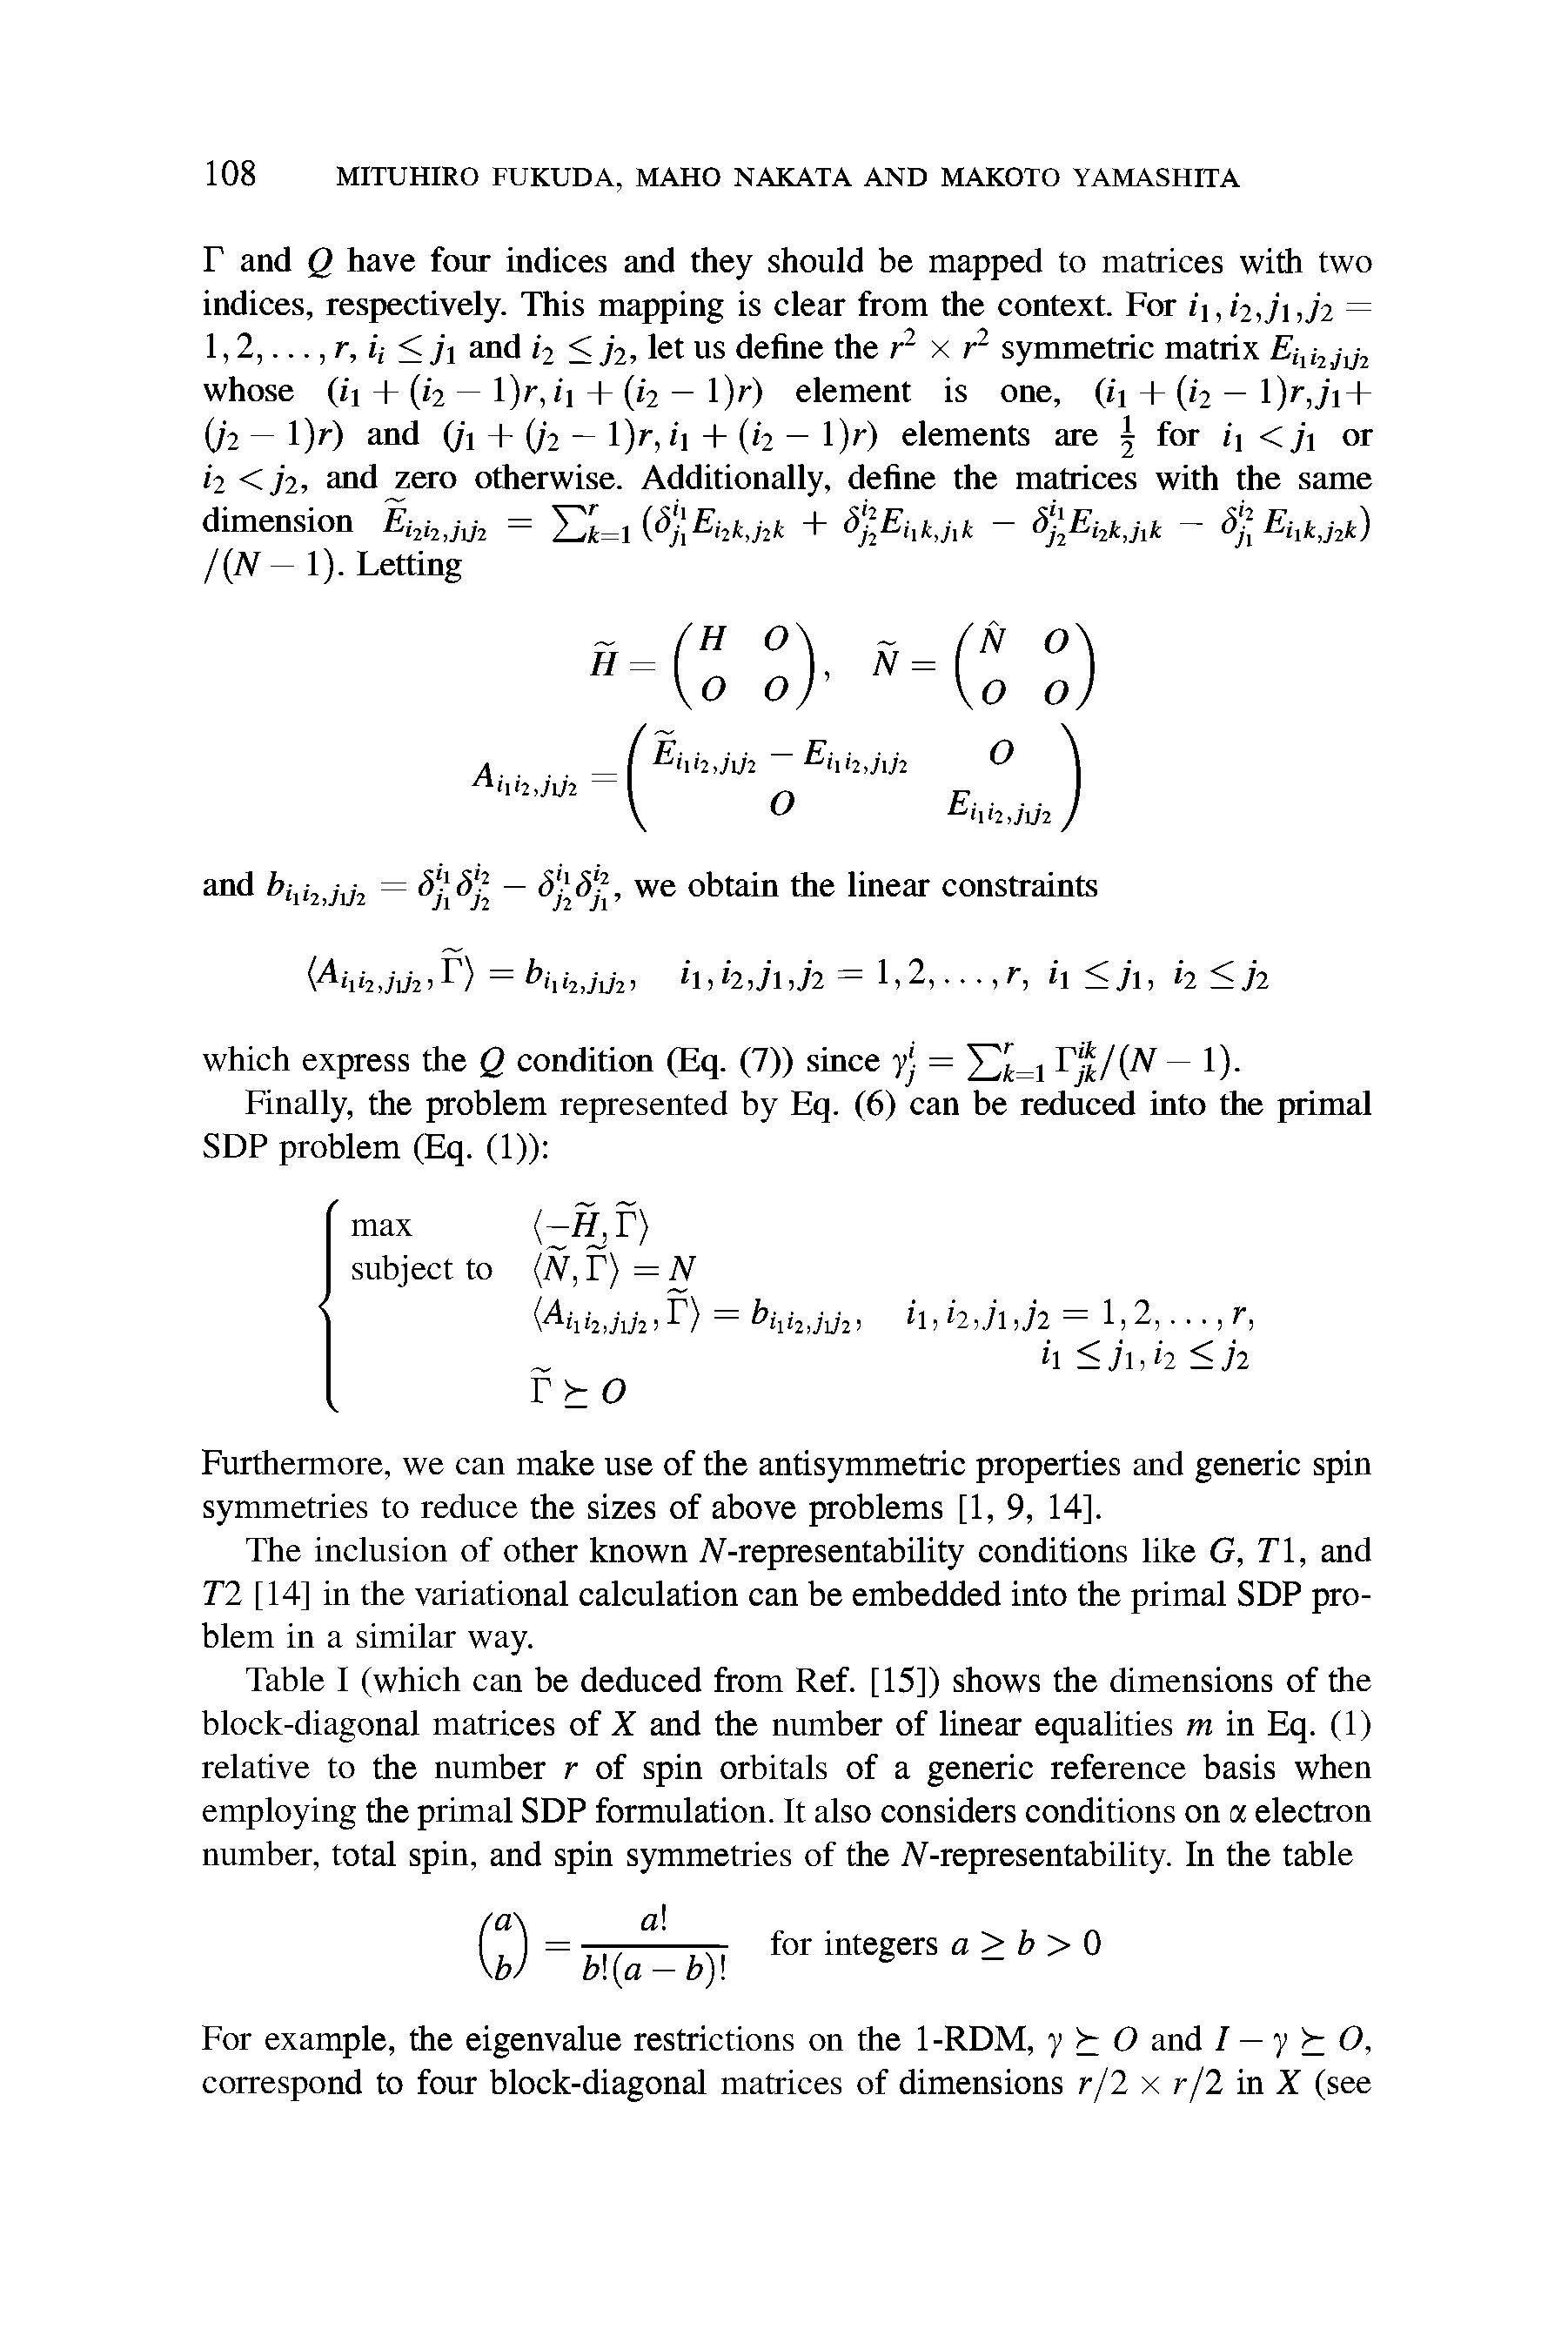 Table I (which can be deduced from Ref. [15]) shows the dimensions of the block-diagonal matrices of X and the number of linear equalities m in Eq. (1) relative to the number r of spin orbitals of a generic reference basis when employing the primal SDP formulation. It also considers conditions on oc electron number, total spin, and spin symmetries of the A-representability. In the table...